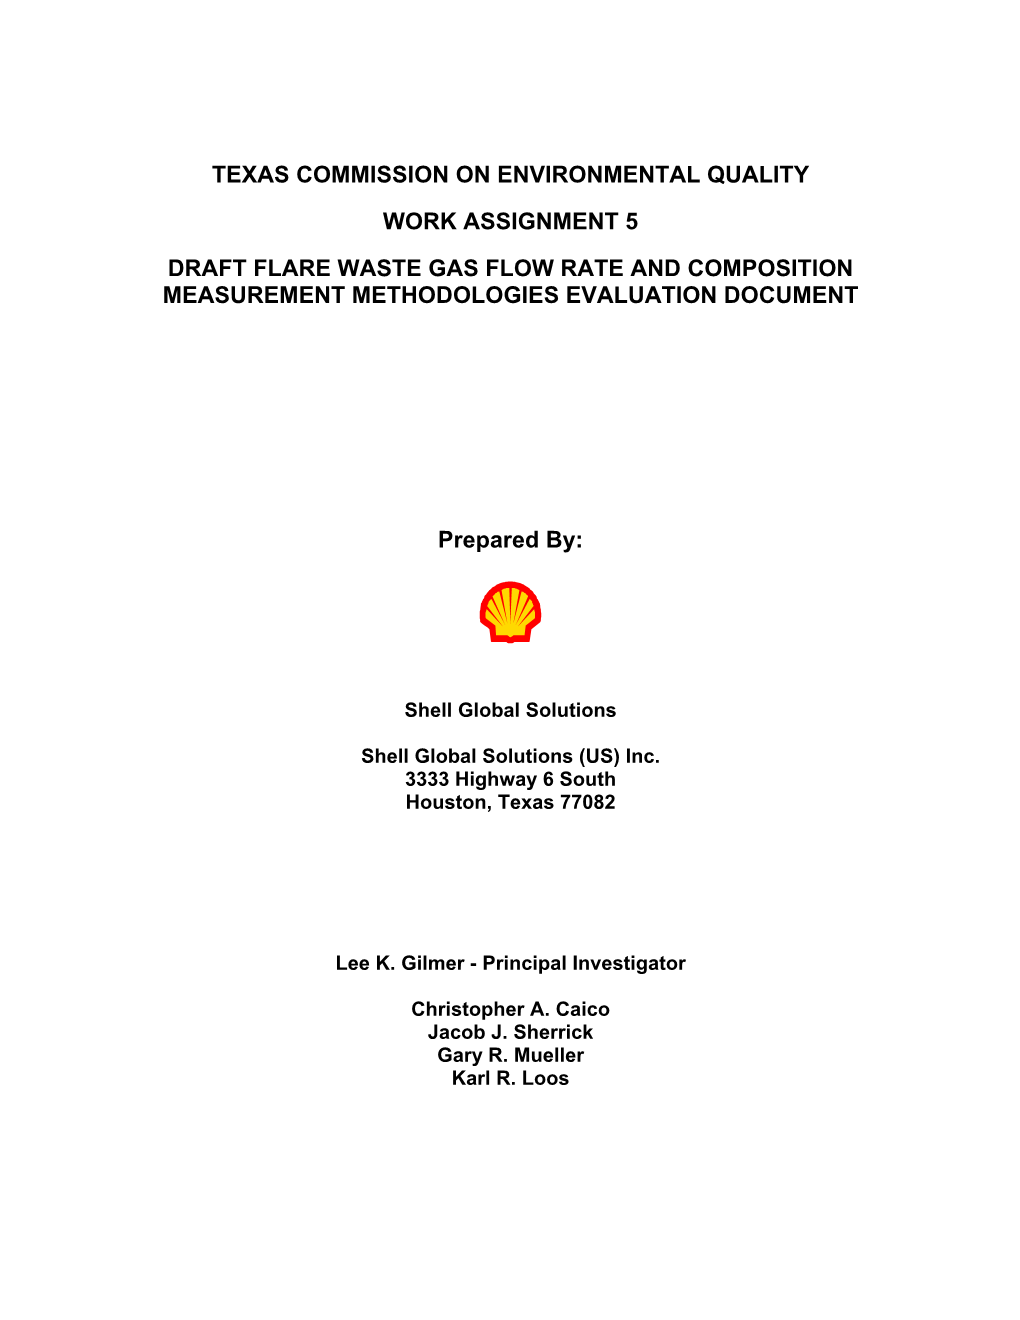 Flare Waste Gas Flow Rate and Composition Measurement Methodologies Evaluation Document